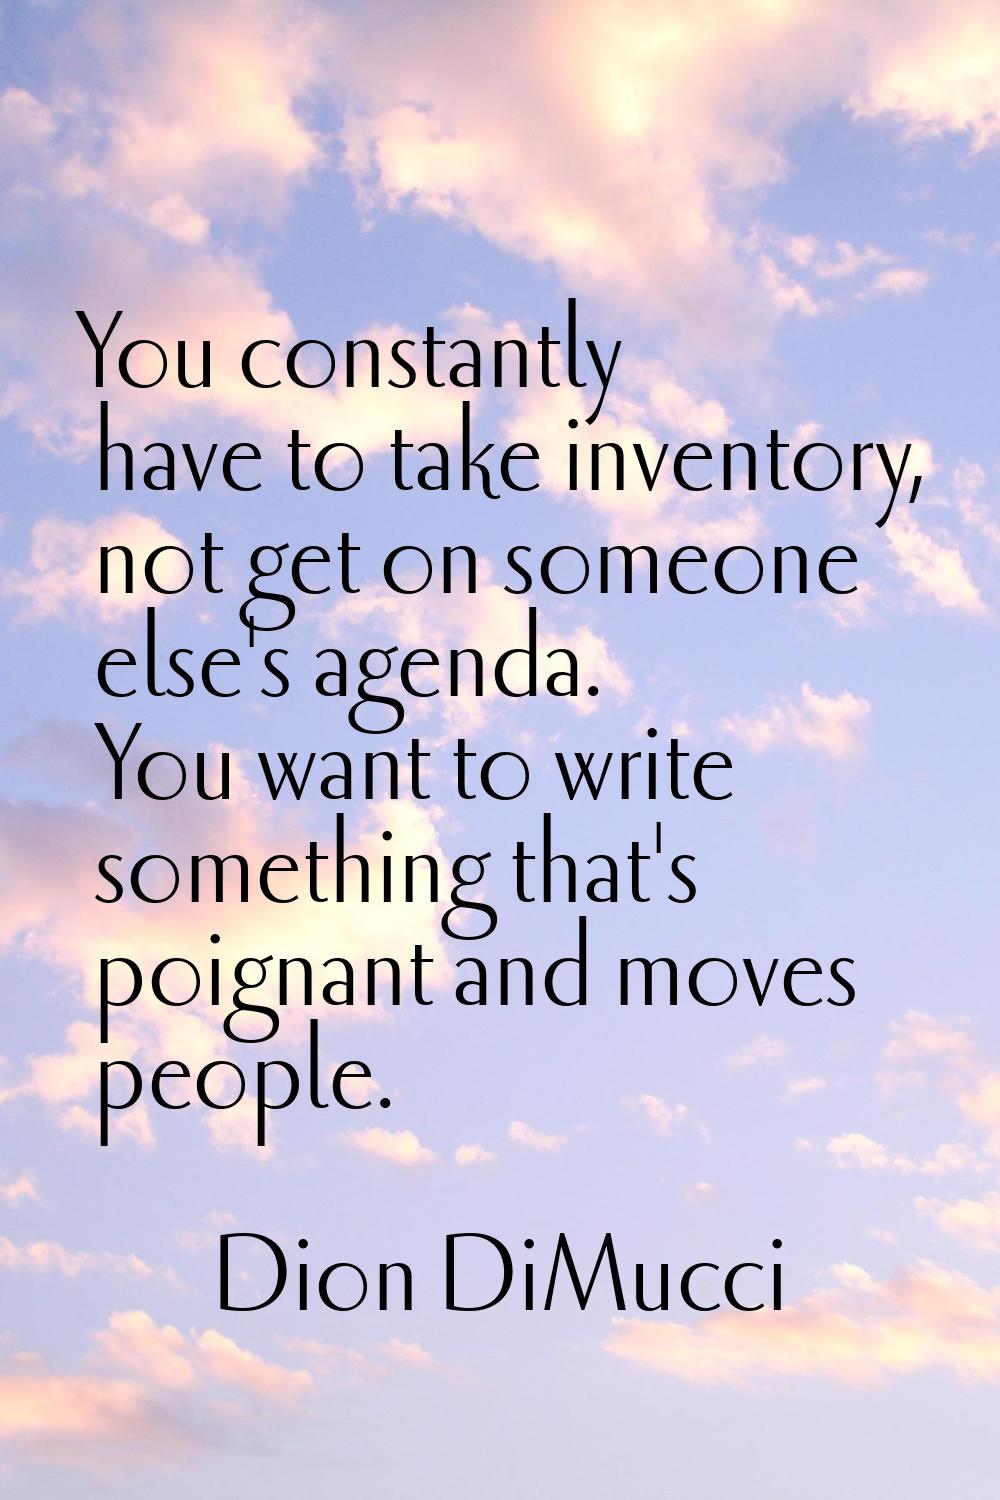 You constantly have to take inventory, not get on someone else's agenda. You want to write somethin